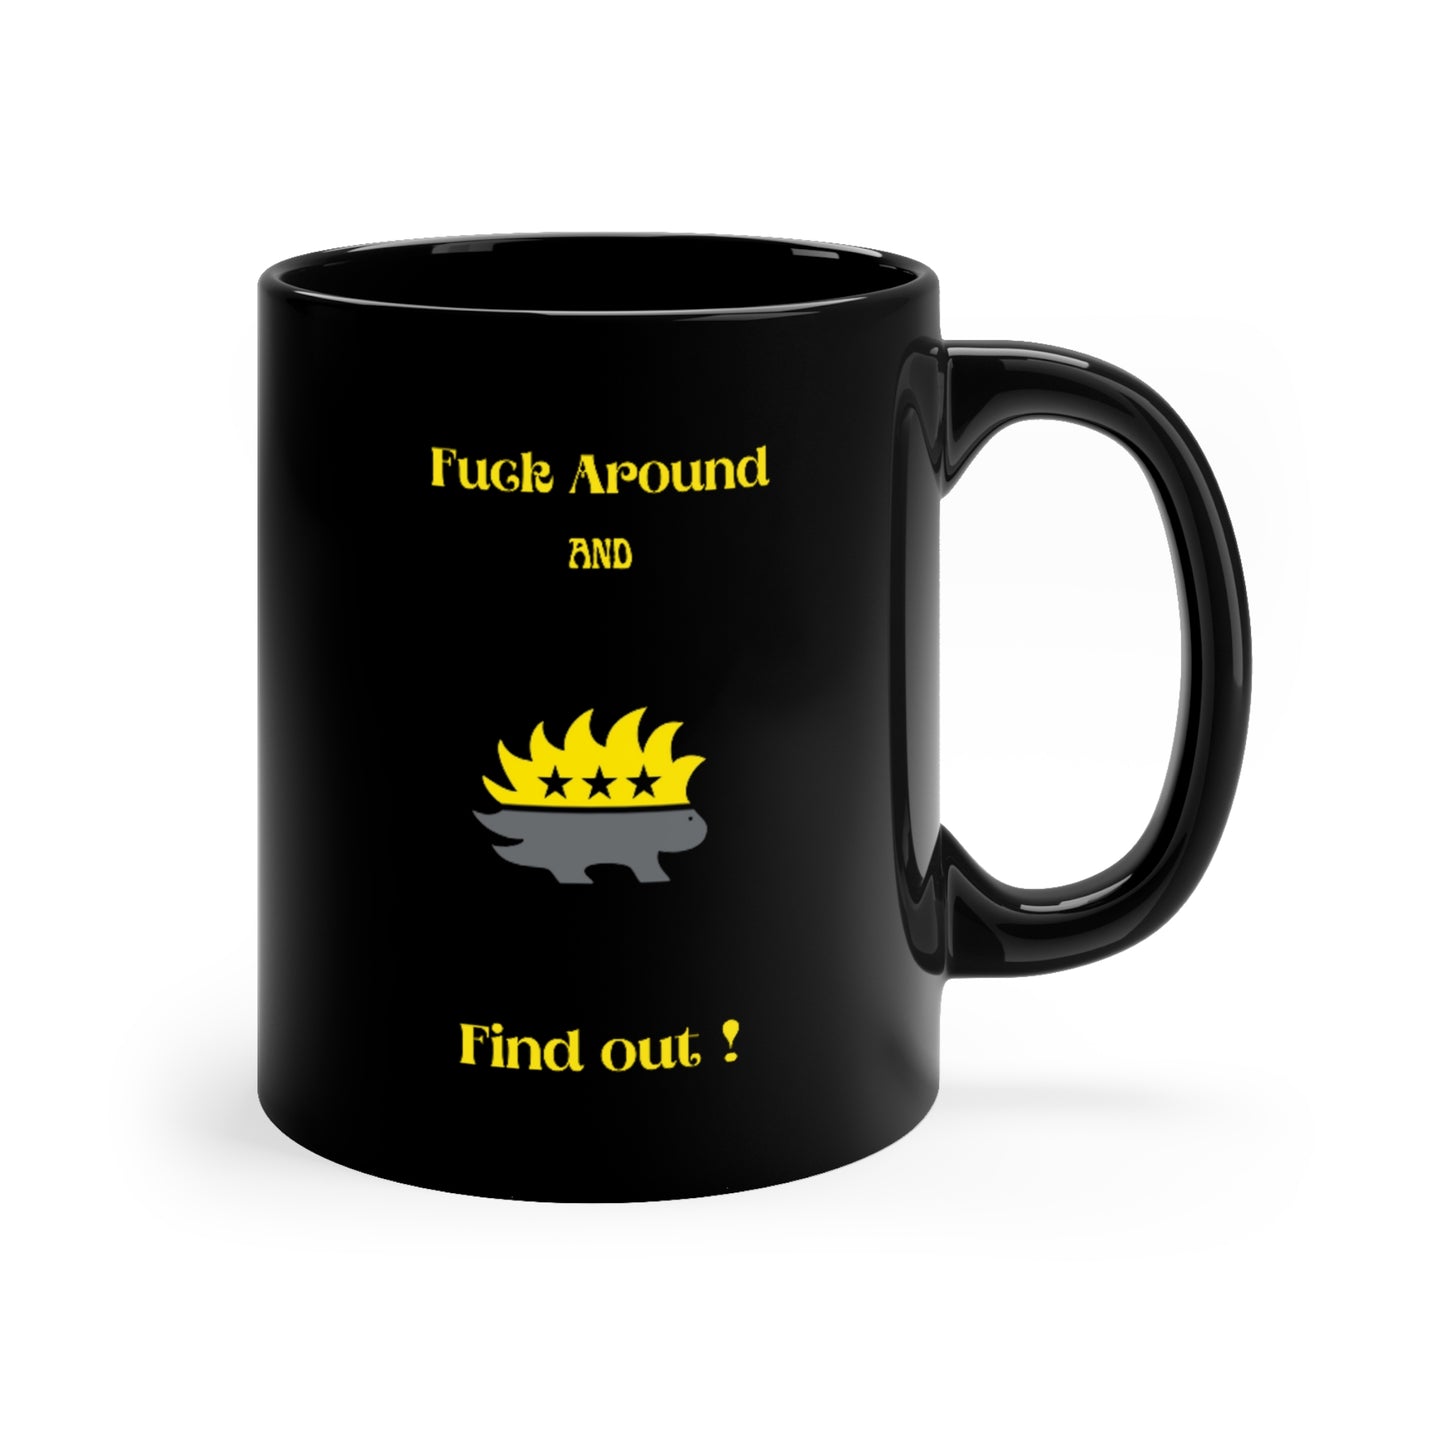 Fuck Around And Find Out! 11oz Black Mug